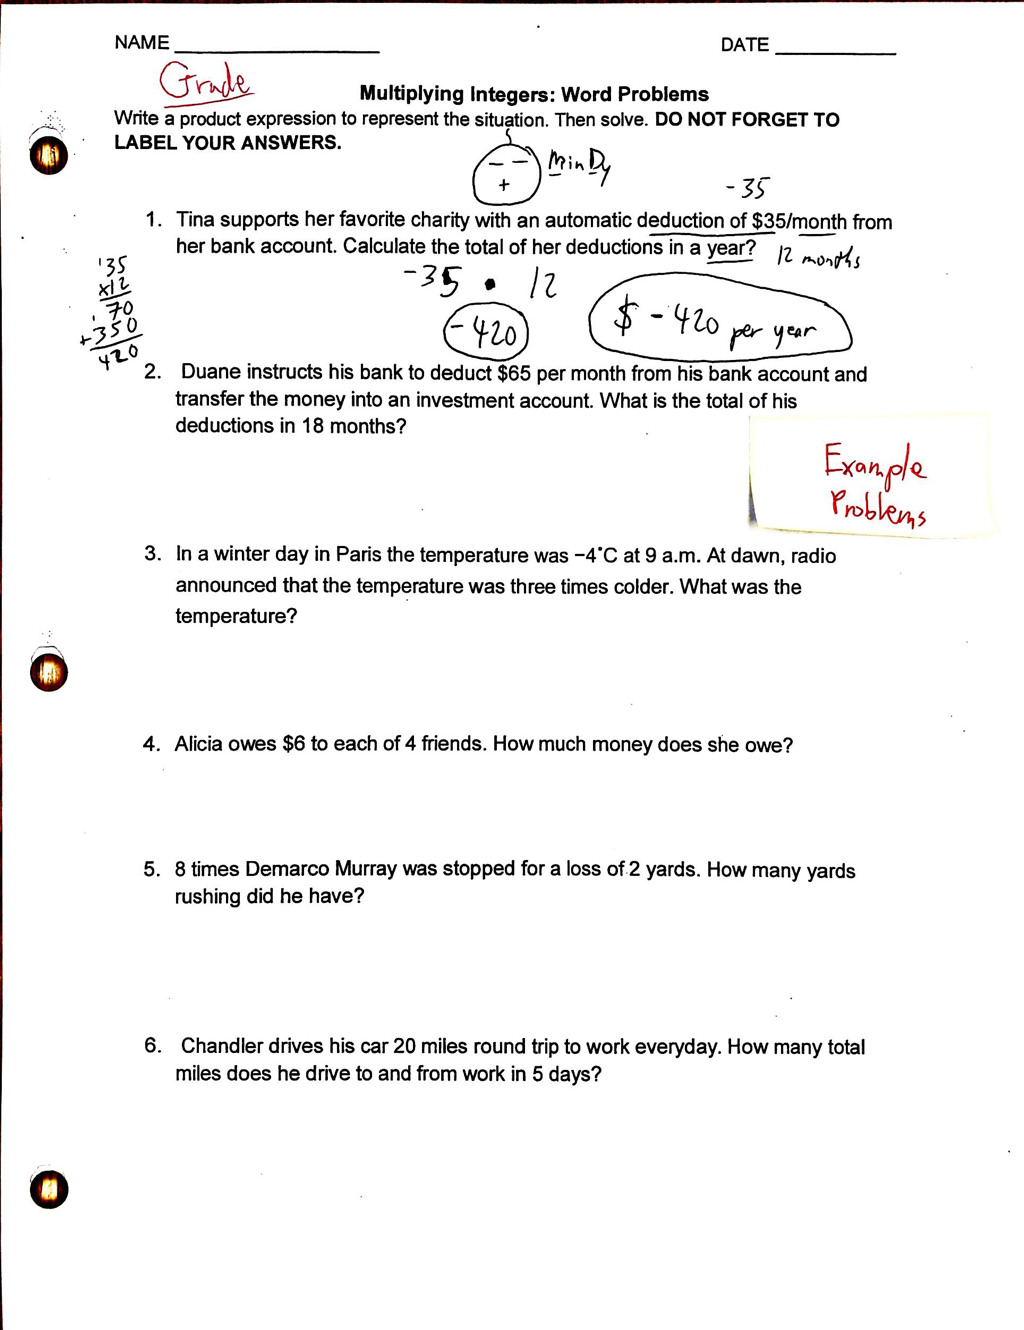 adv-hw-with-examples-7-4-problem-solving-practice-multiplying-integers-word-problems-for-a